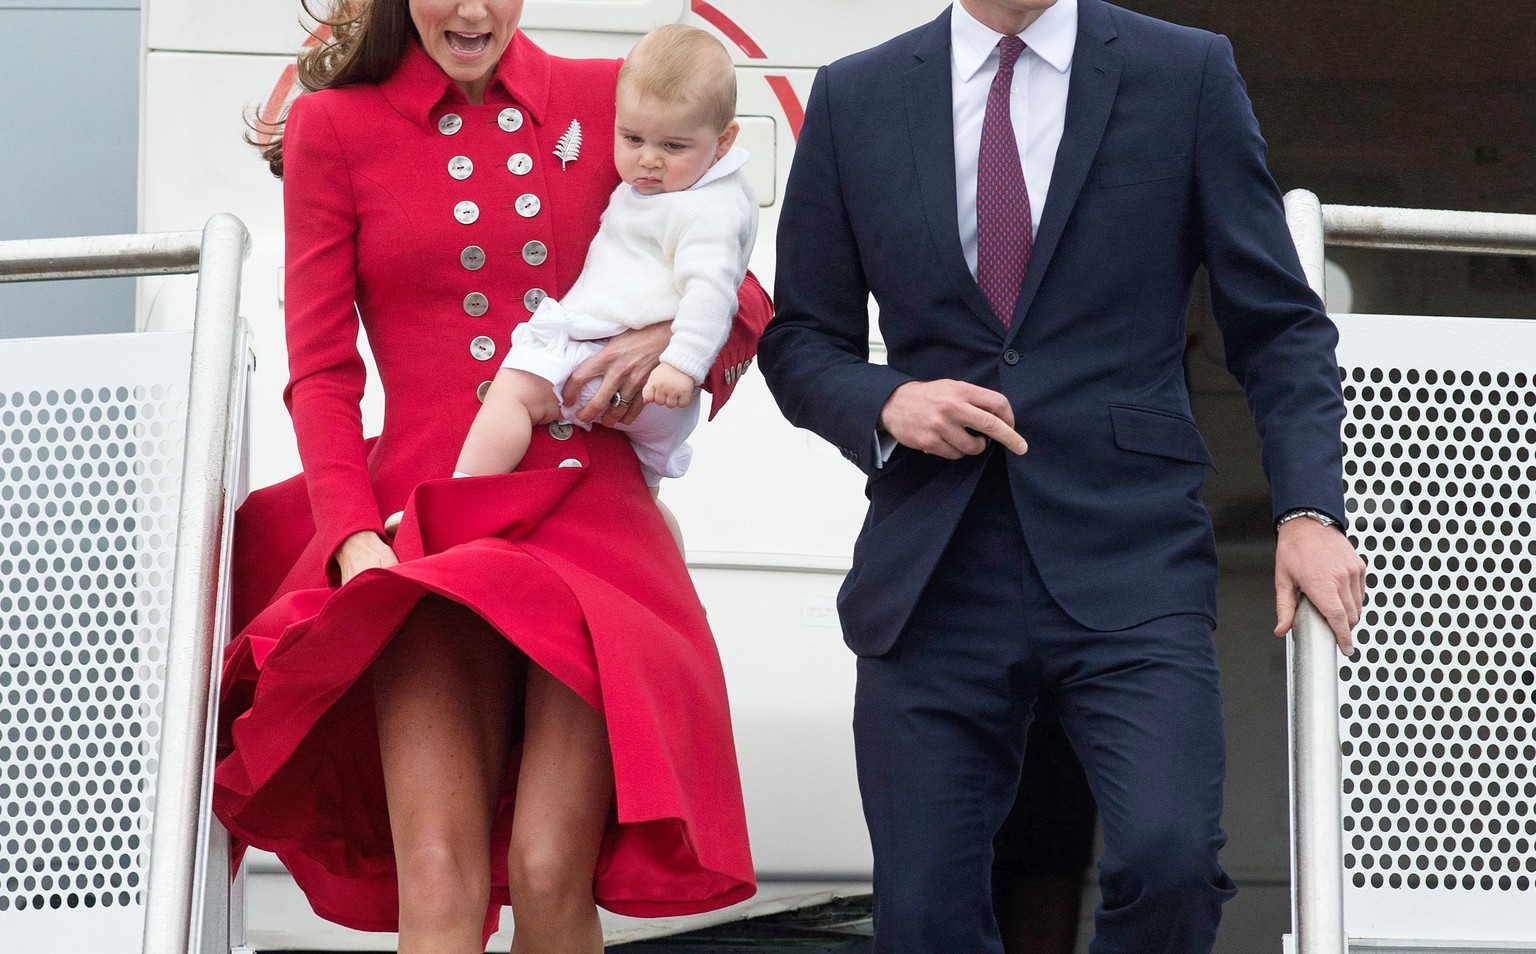 Kates Marilyn-Monroe-Moment: Prince George is not impressed.